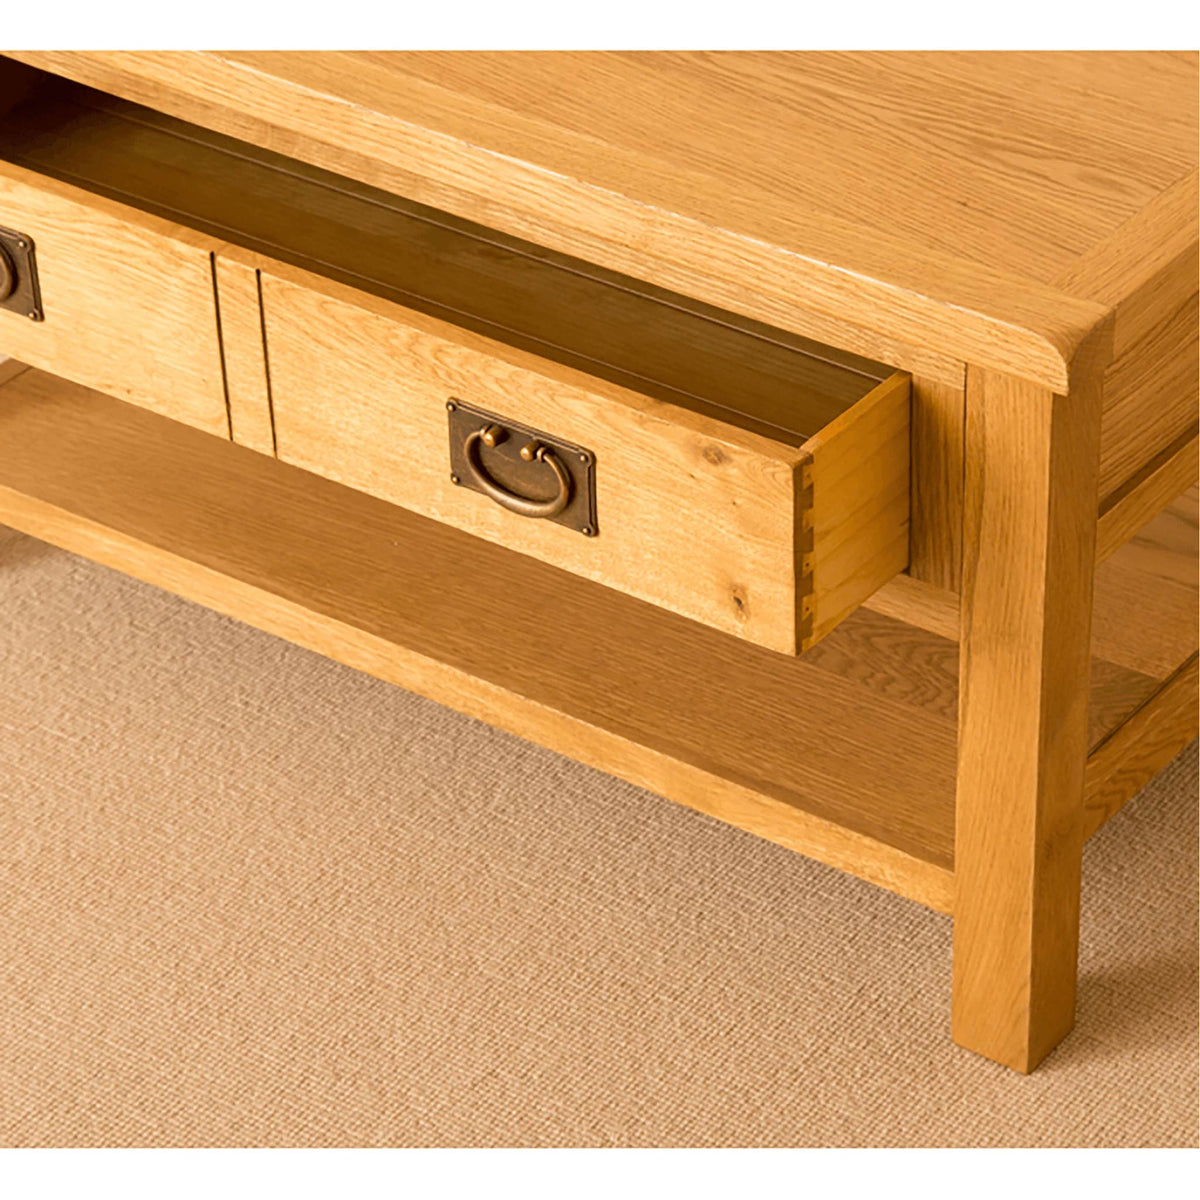 Lanner Oak Coffee Table with drawers open 